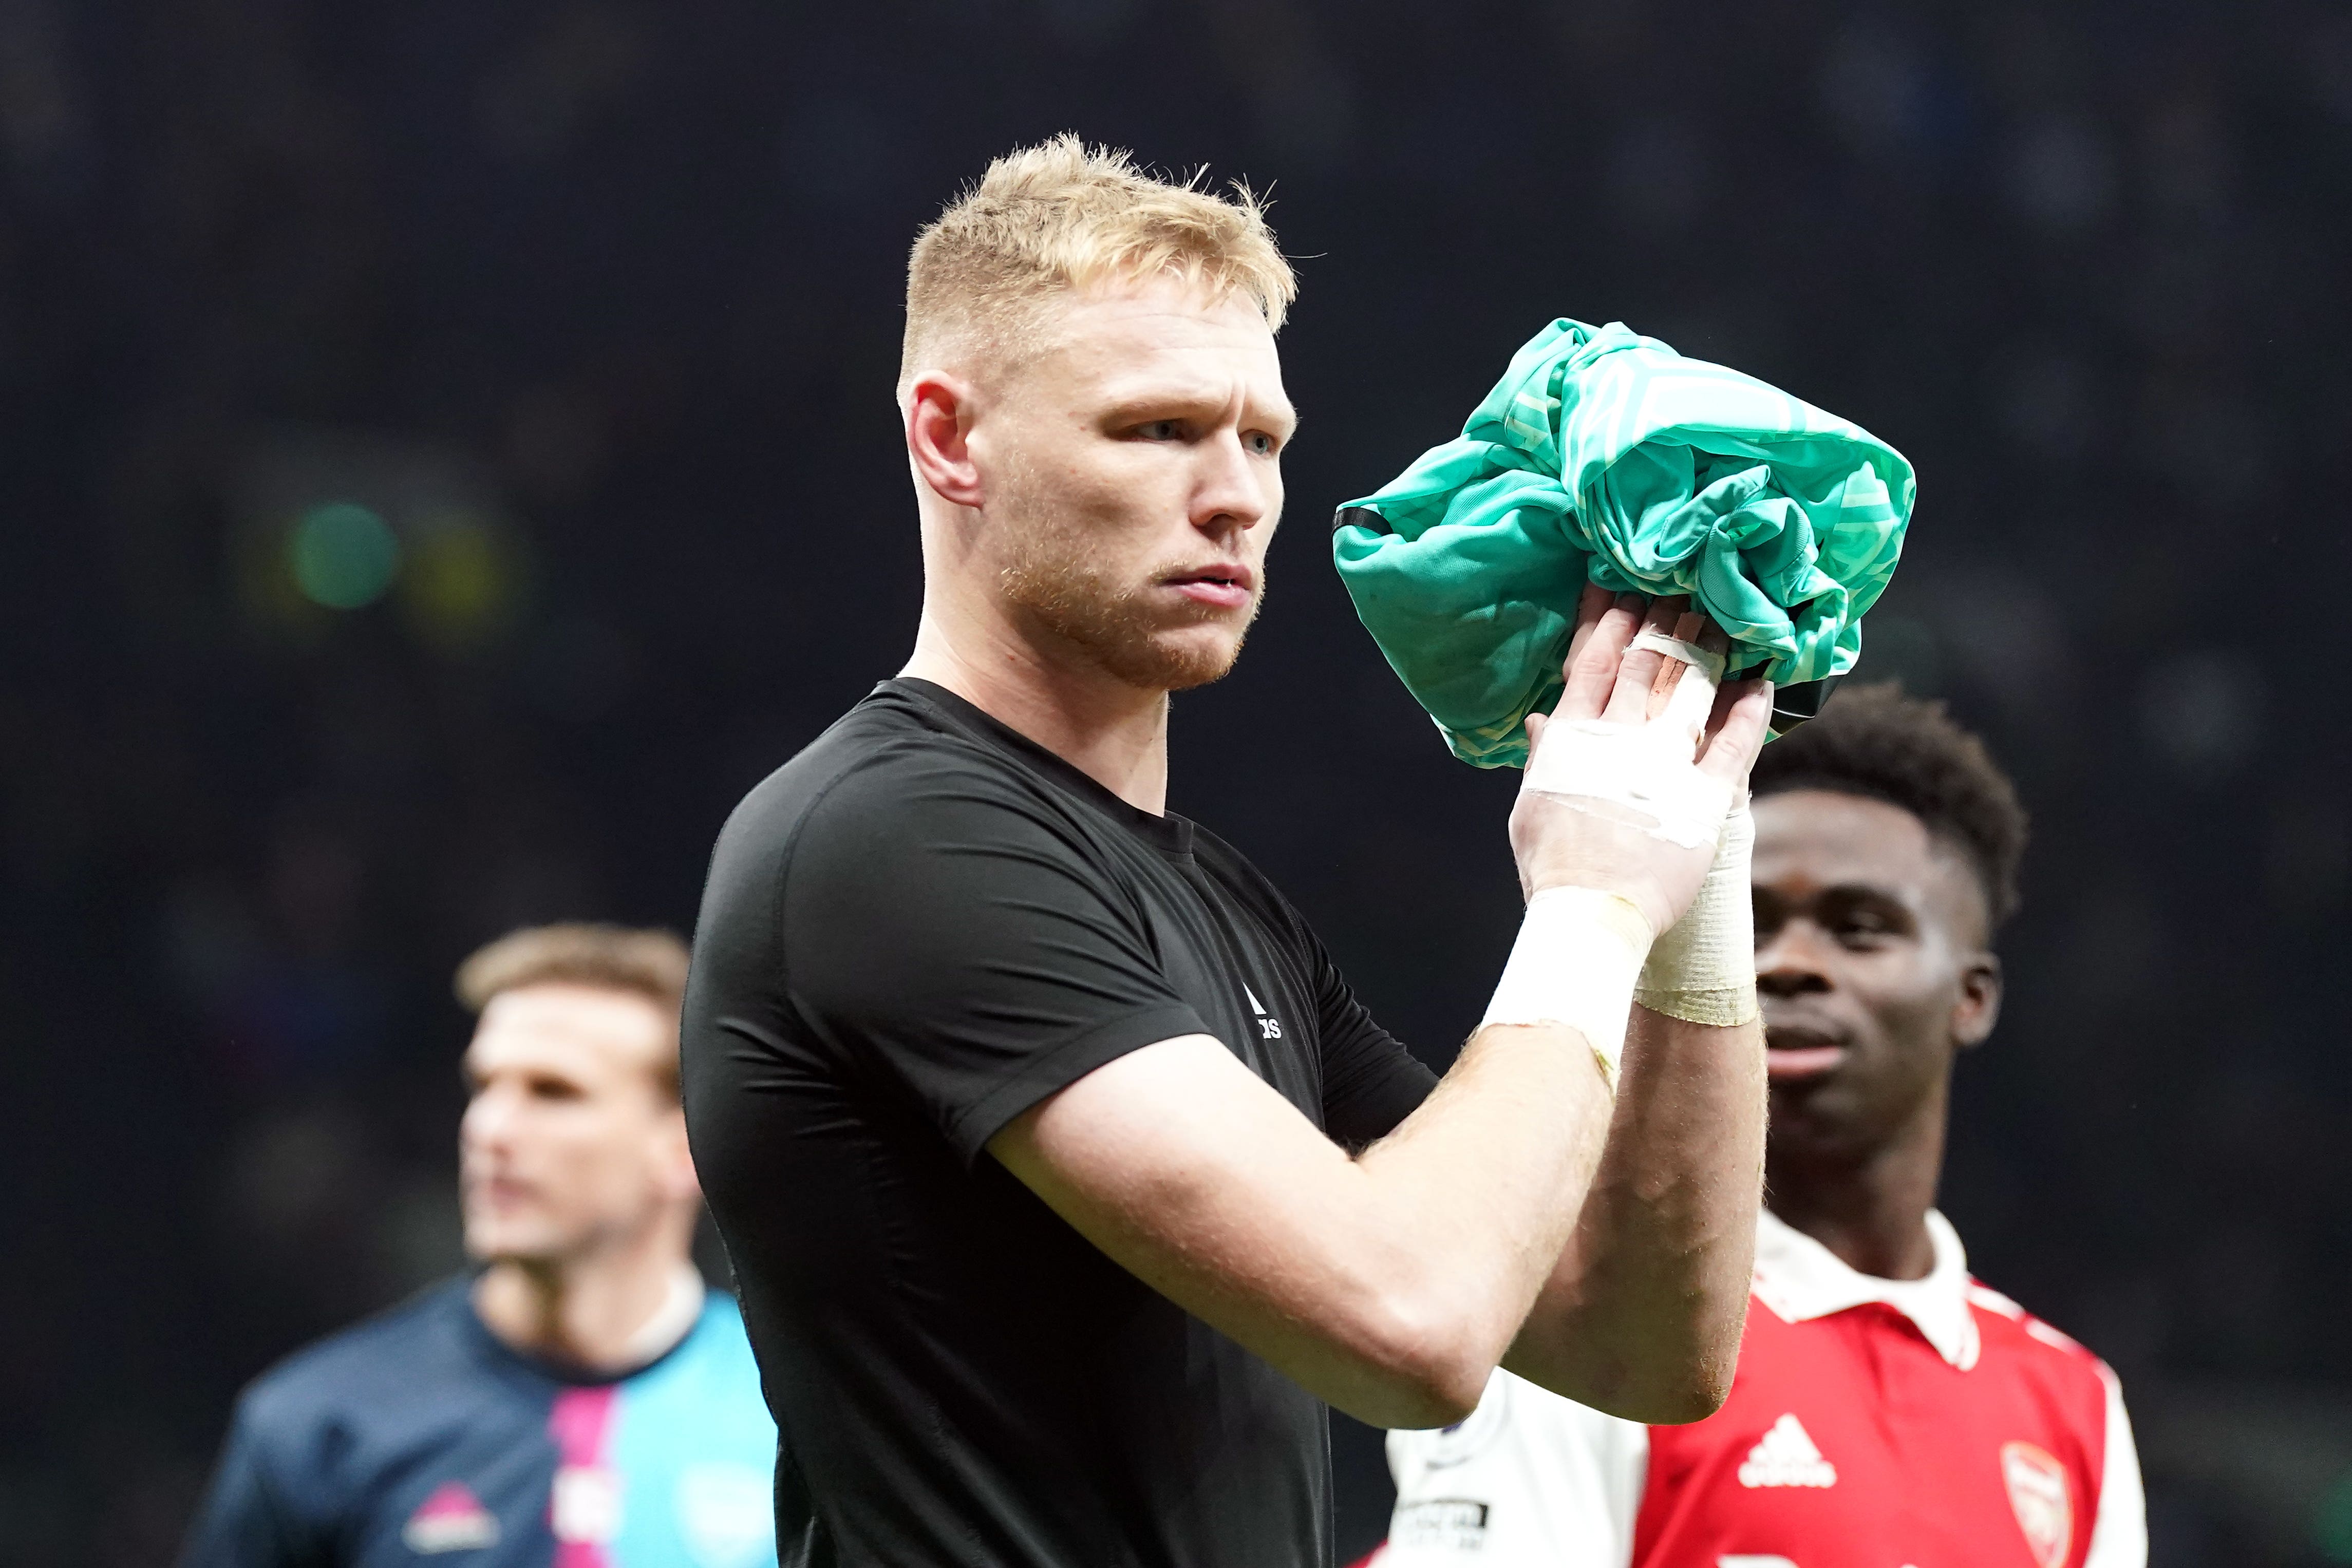 Arsenal goalkeeper Aaron Ramsdale was attacked in an incident after a match on Sunday (Nick Potts/PA)